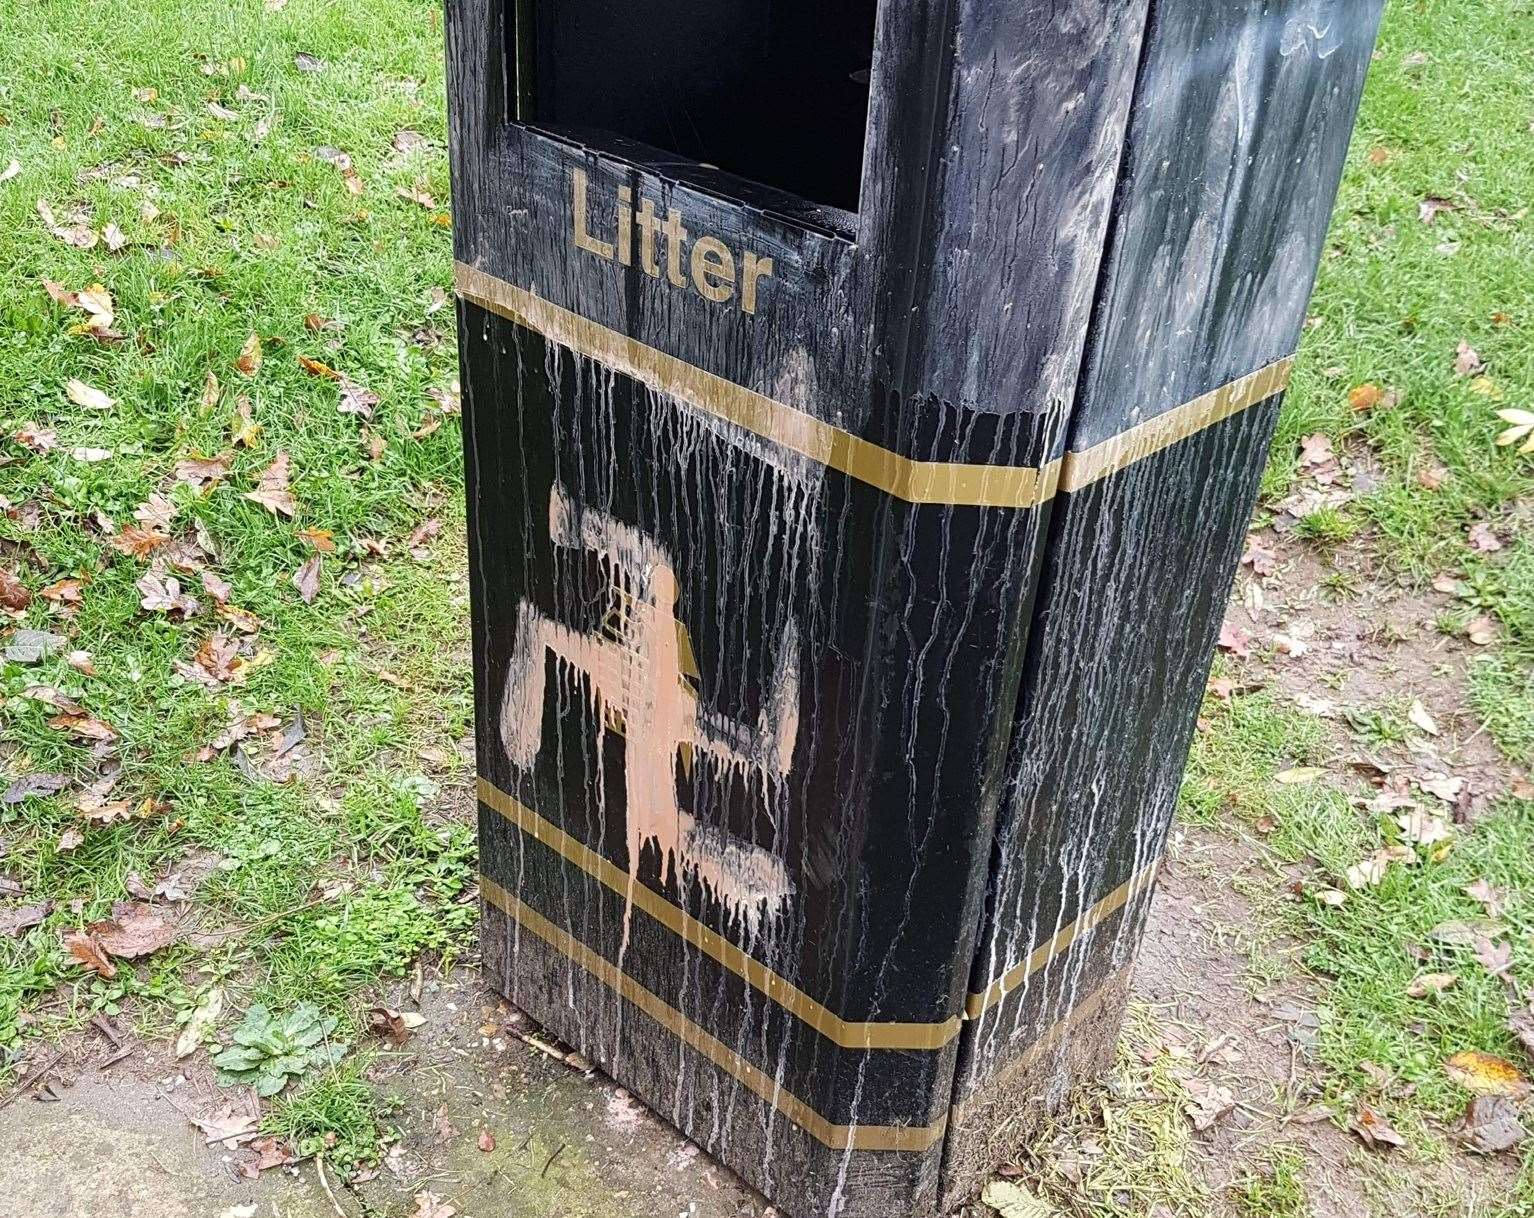 Bins have also been targeted. Picture: Sharon Hobley